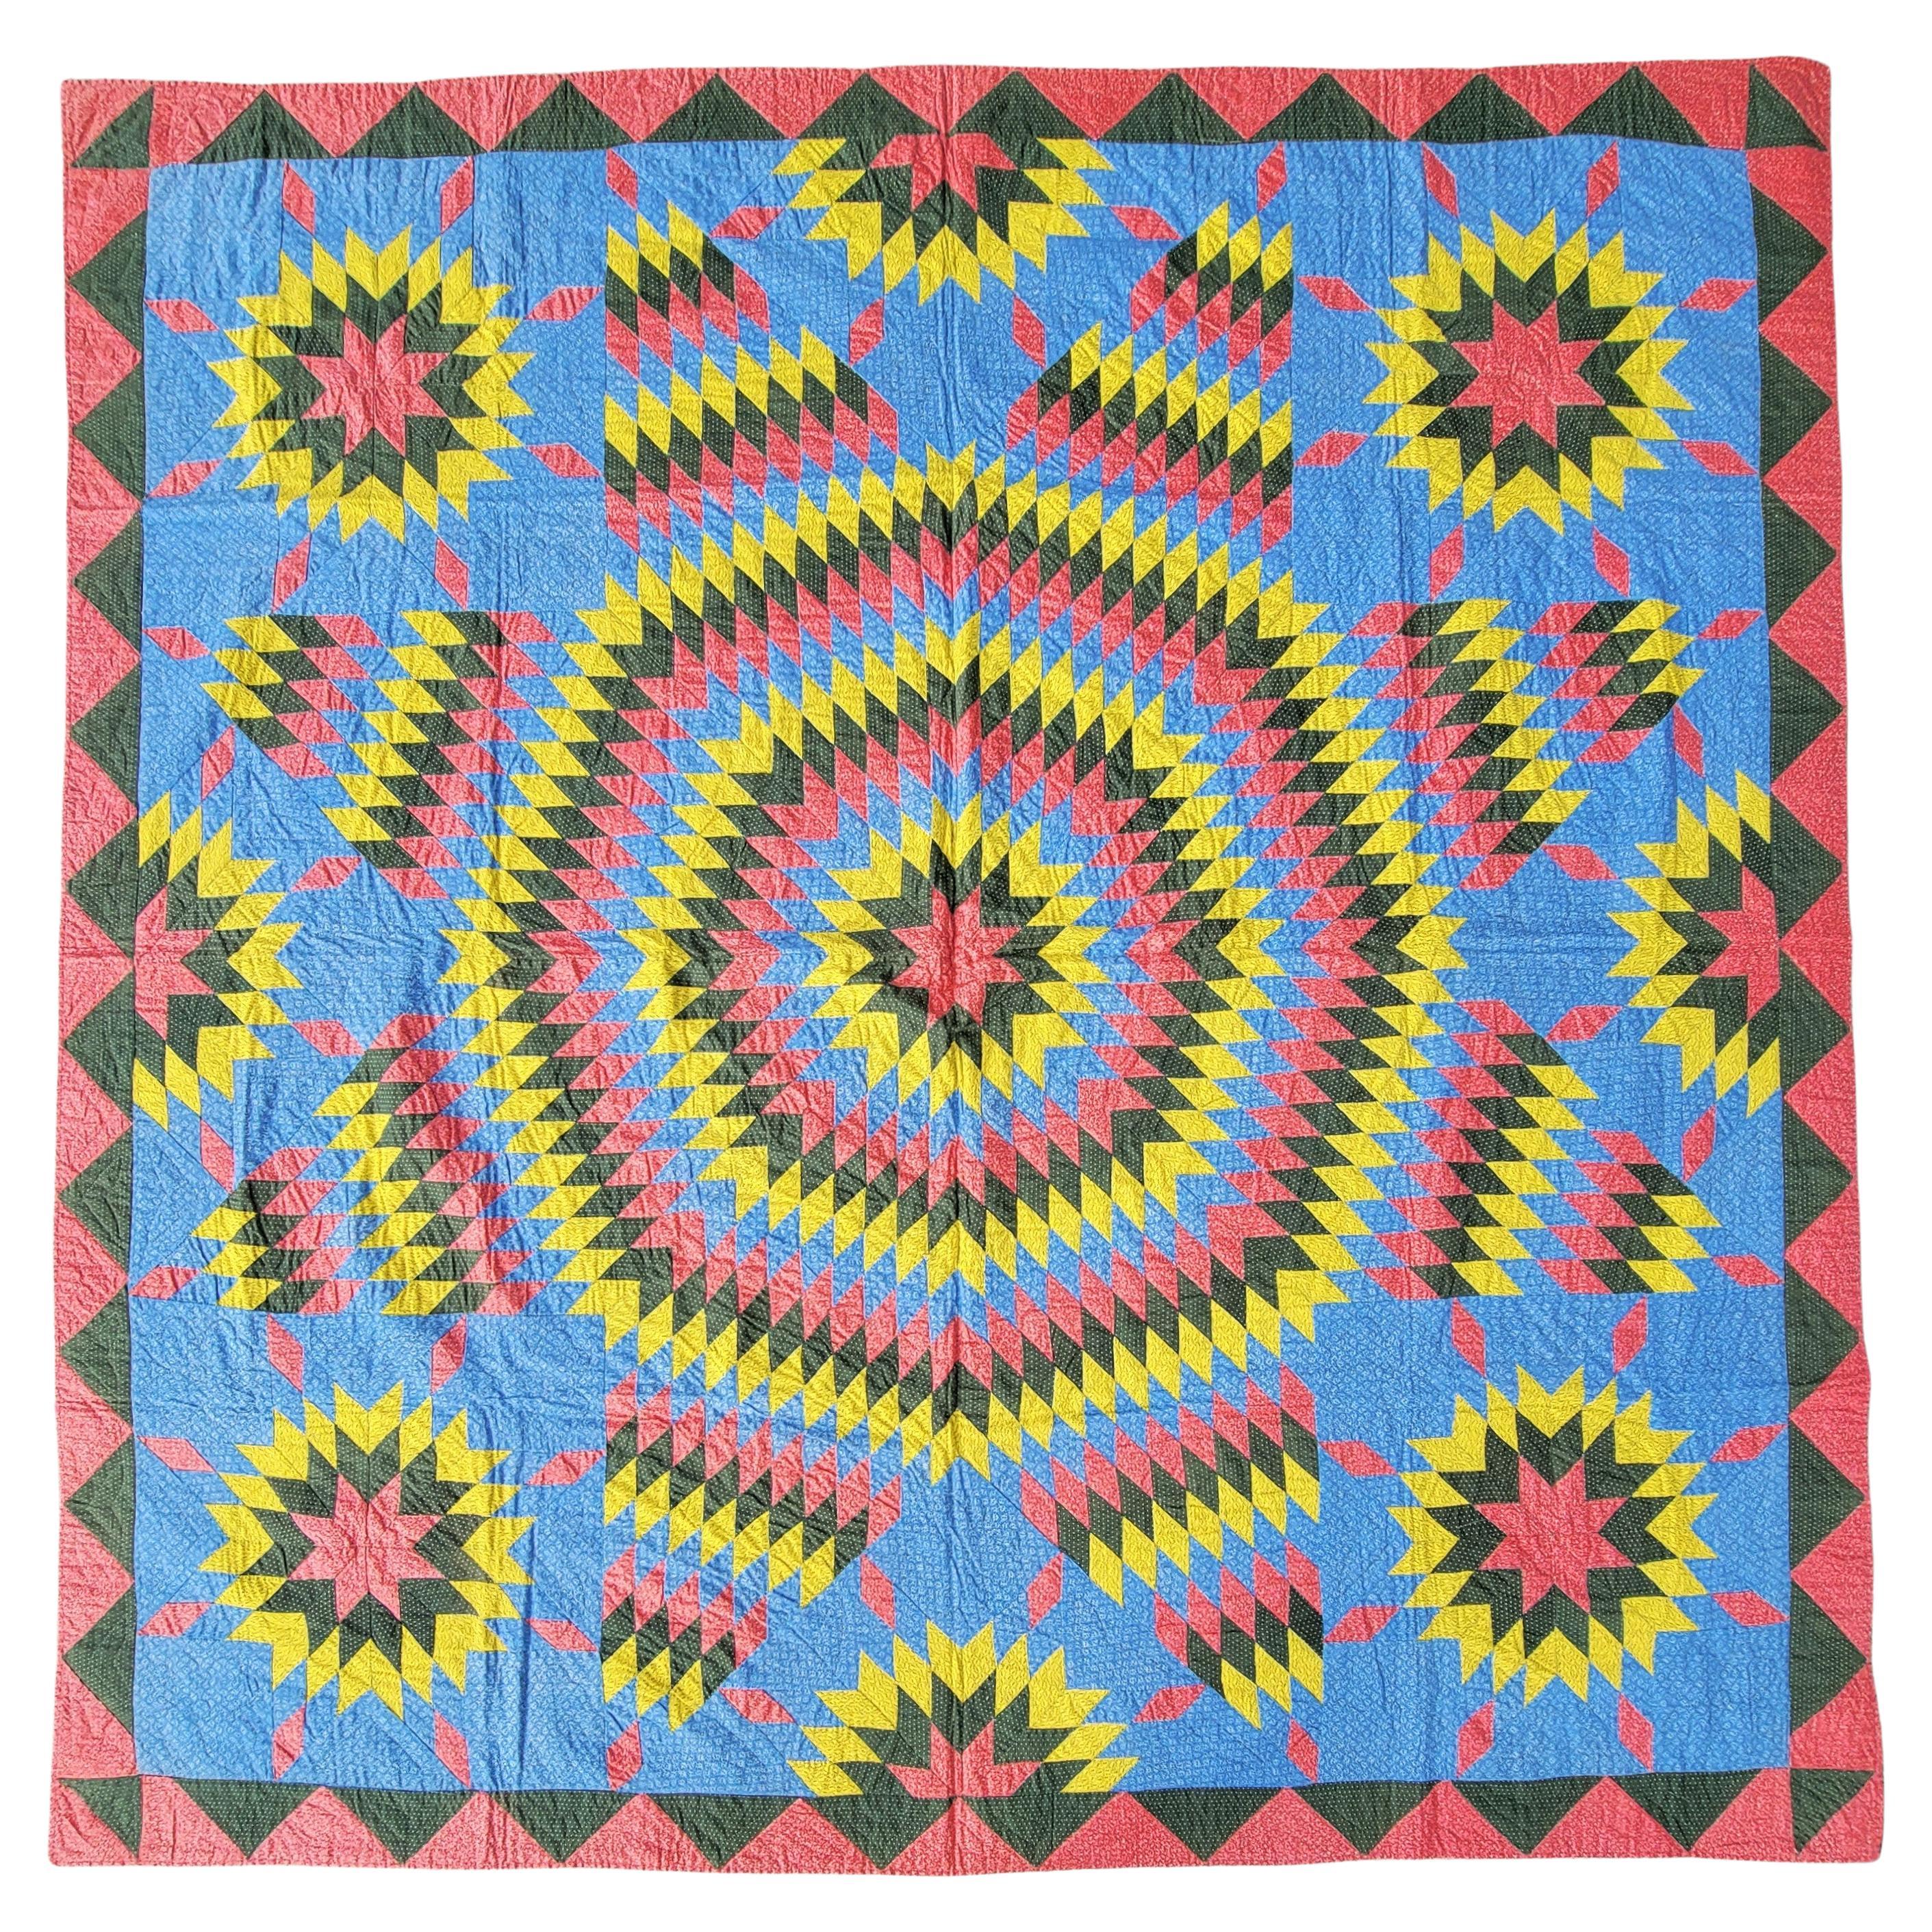 19Thc Eight Point Star Quilt From Pennsylvania